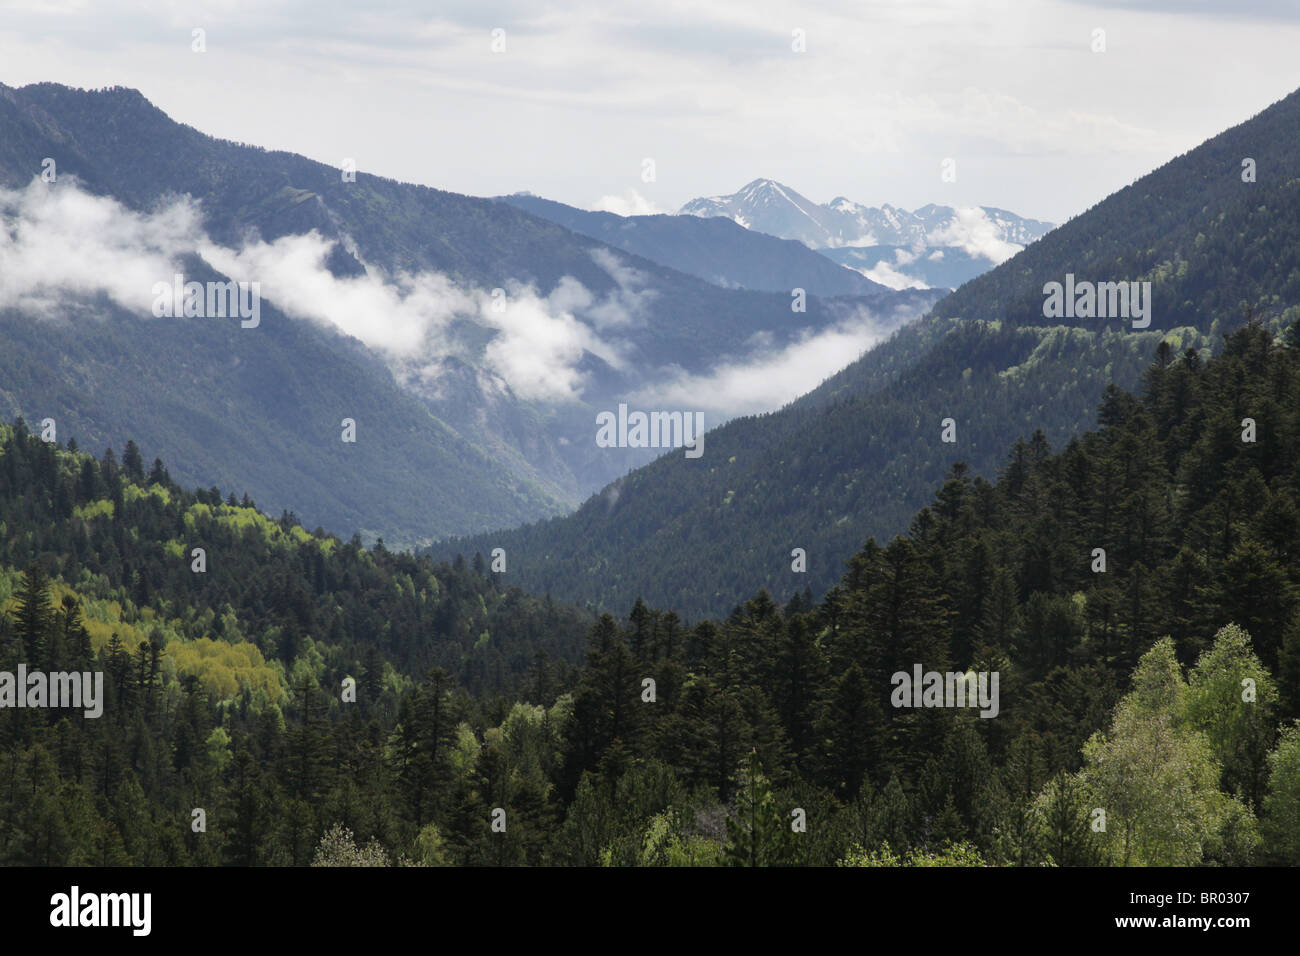 Rising mist and low cloud swirl around subalpine forest and mountains the Sant Maurici National Park Pyrenees Spain Stock Photo